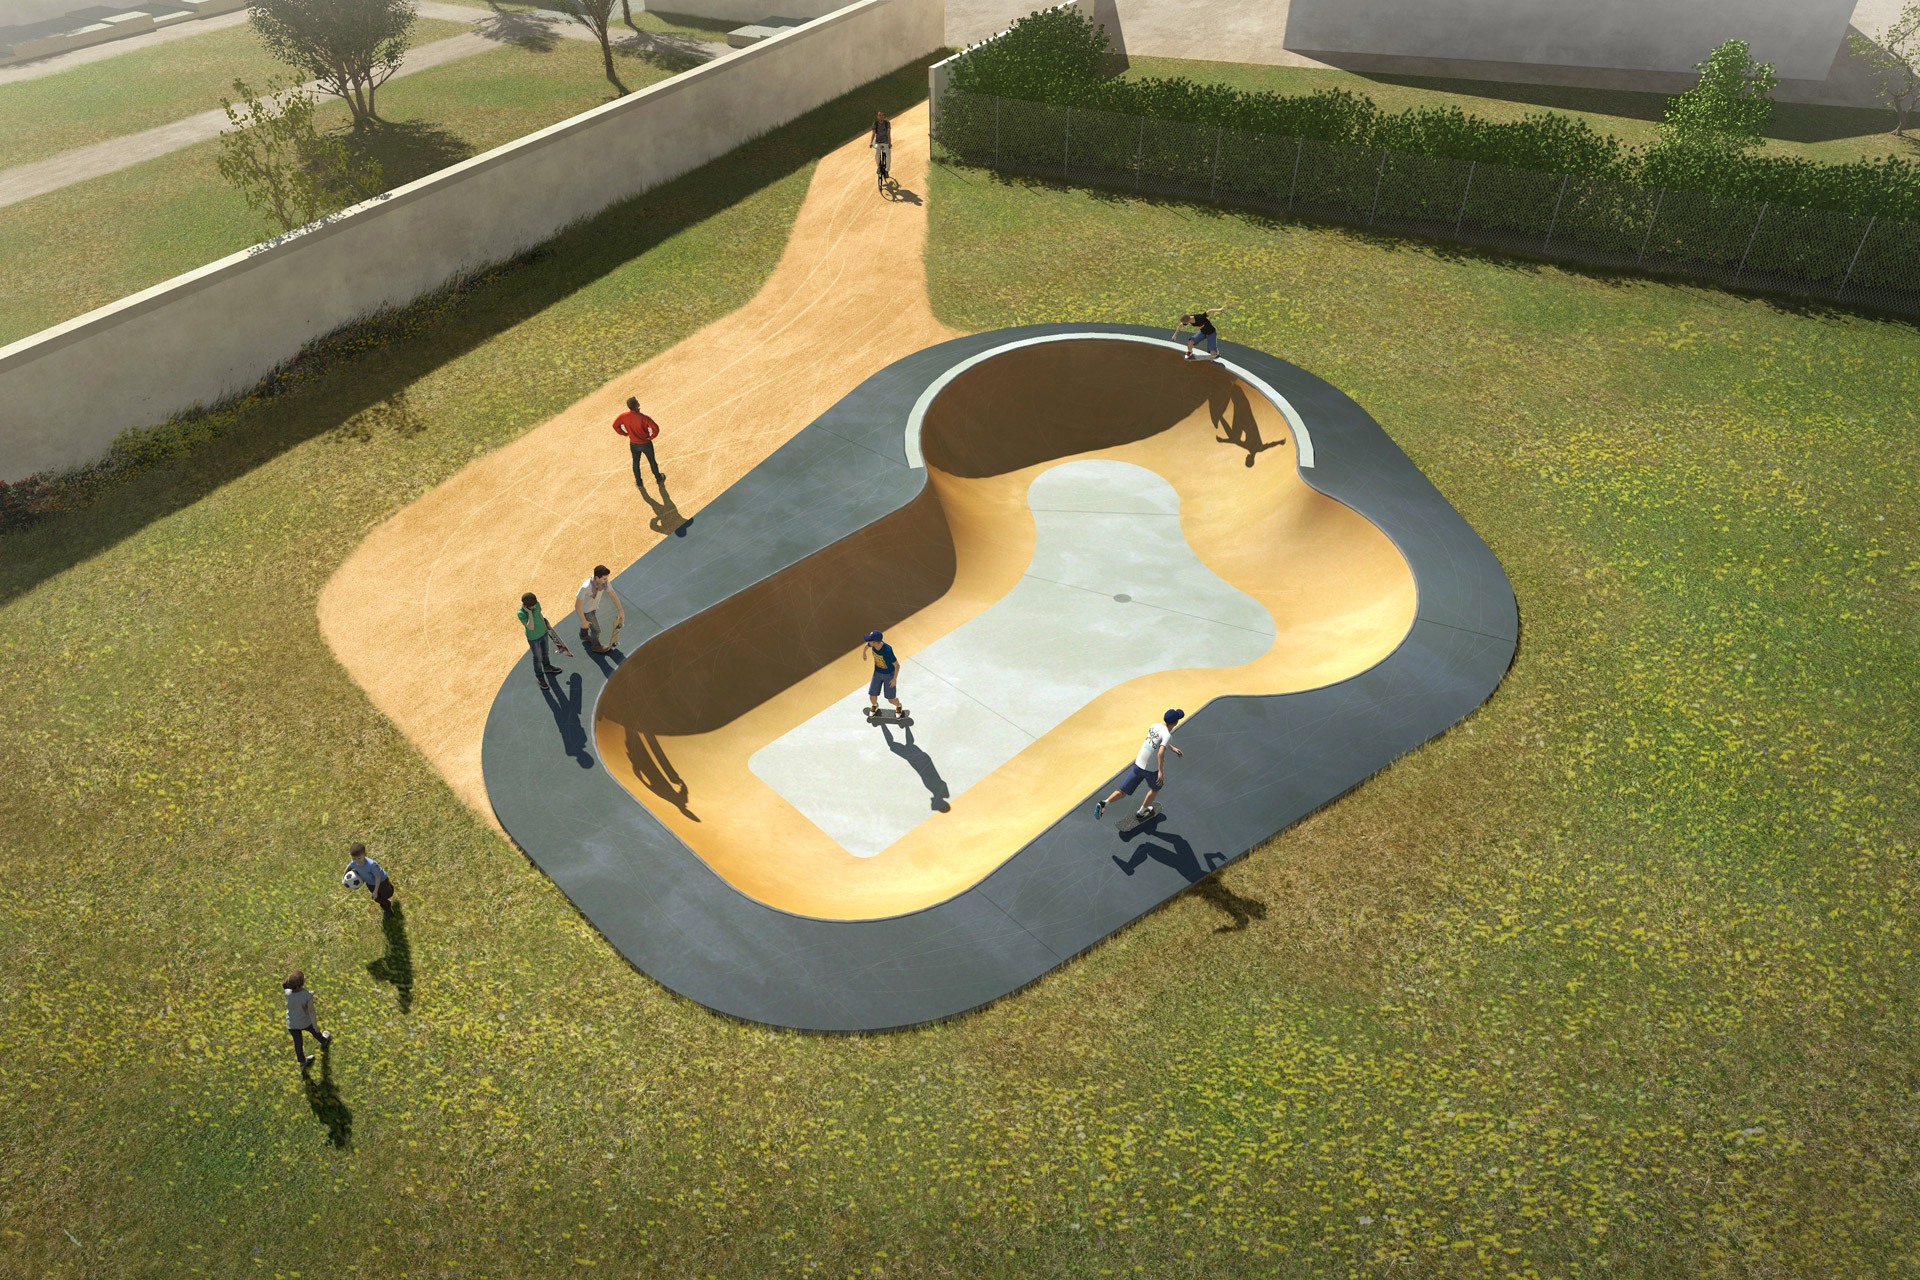 CHATEAUDOUBLE skatepark